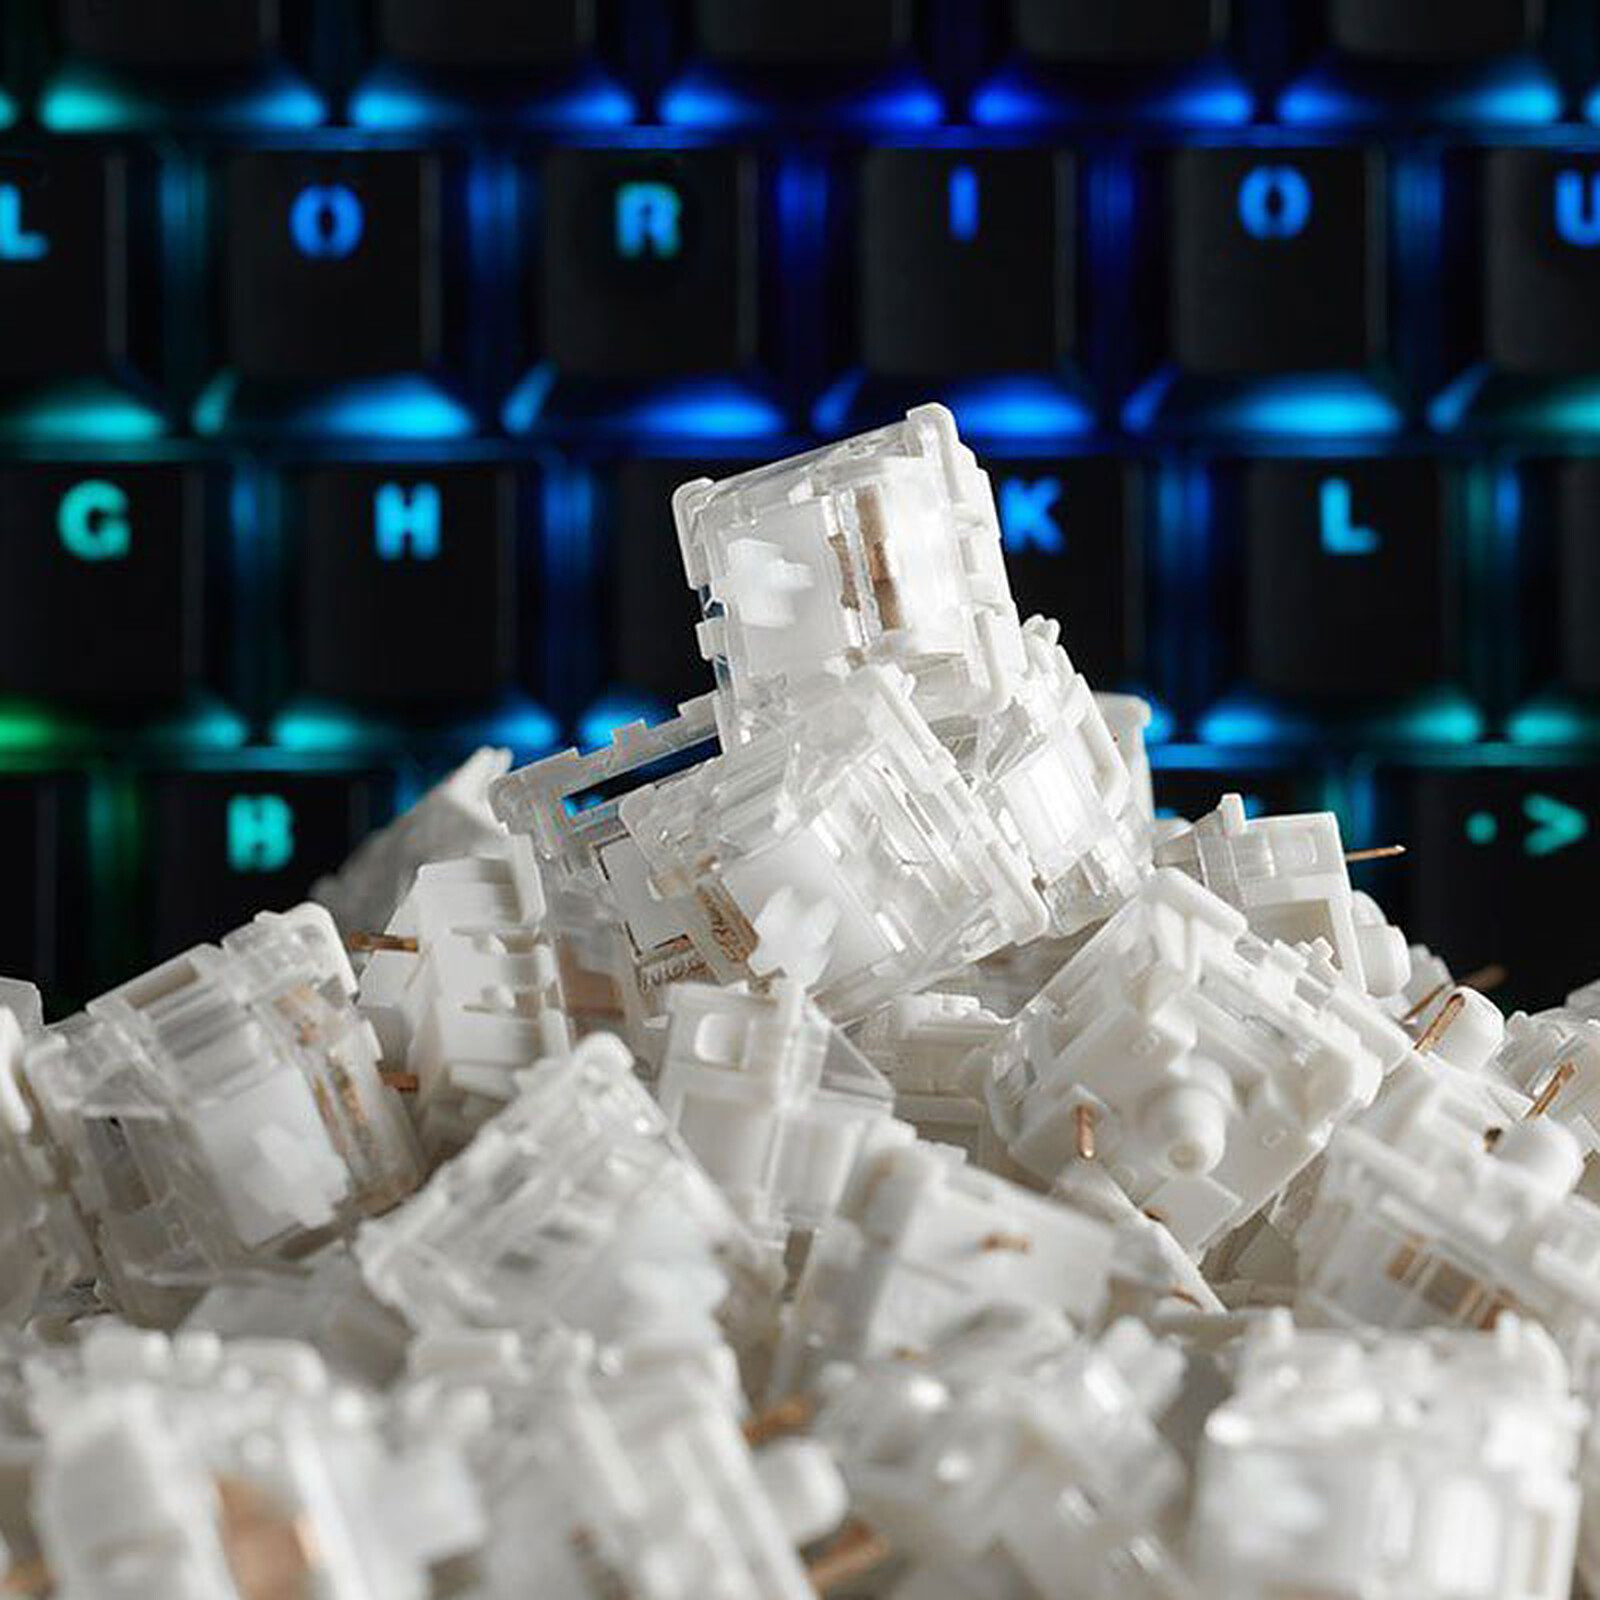 Glorious Gateron Switches x120 (Transparent) - Keyboard Glorious PC Gaming Race on